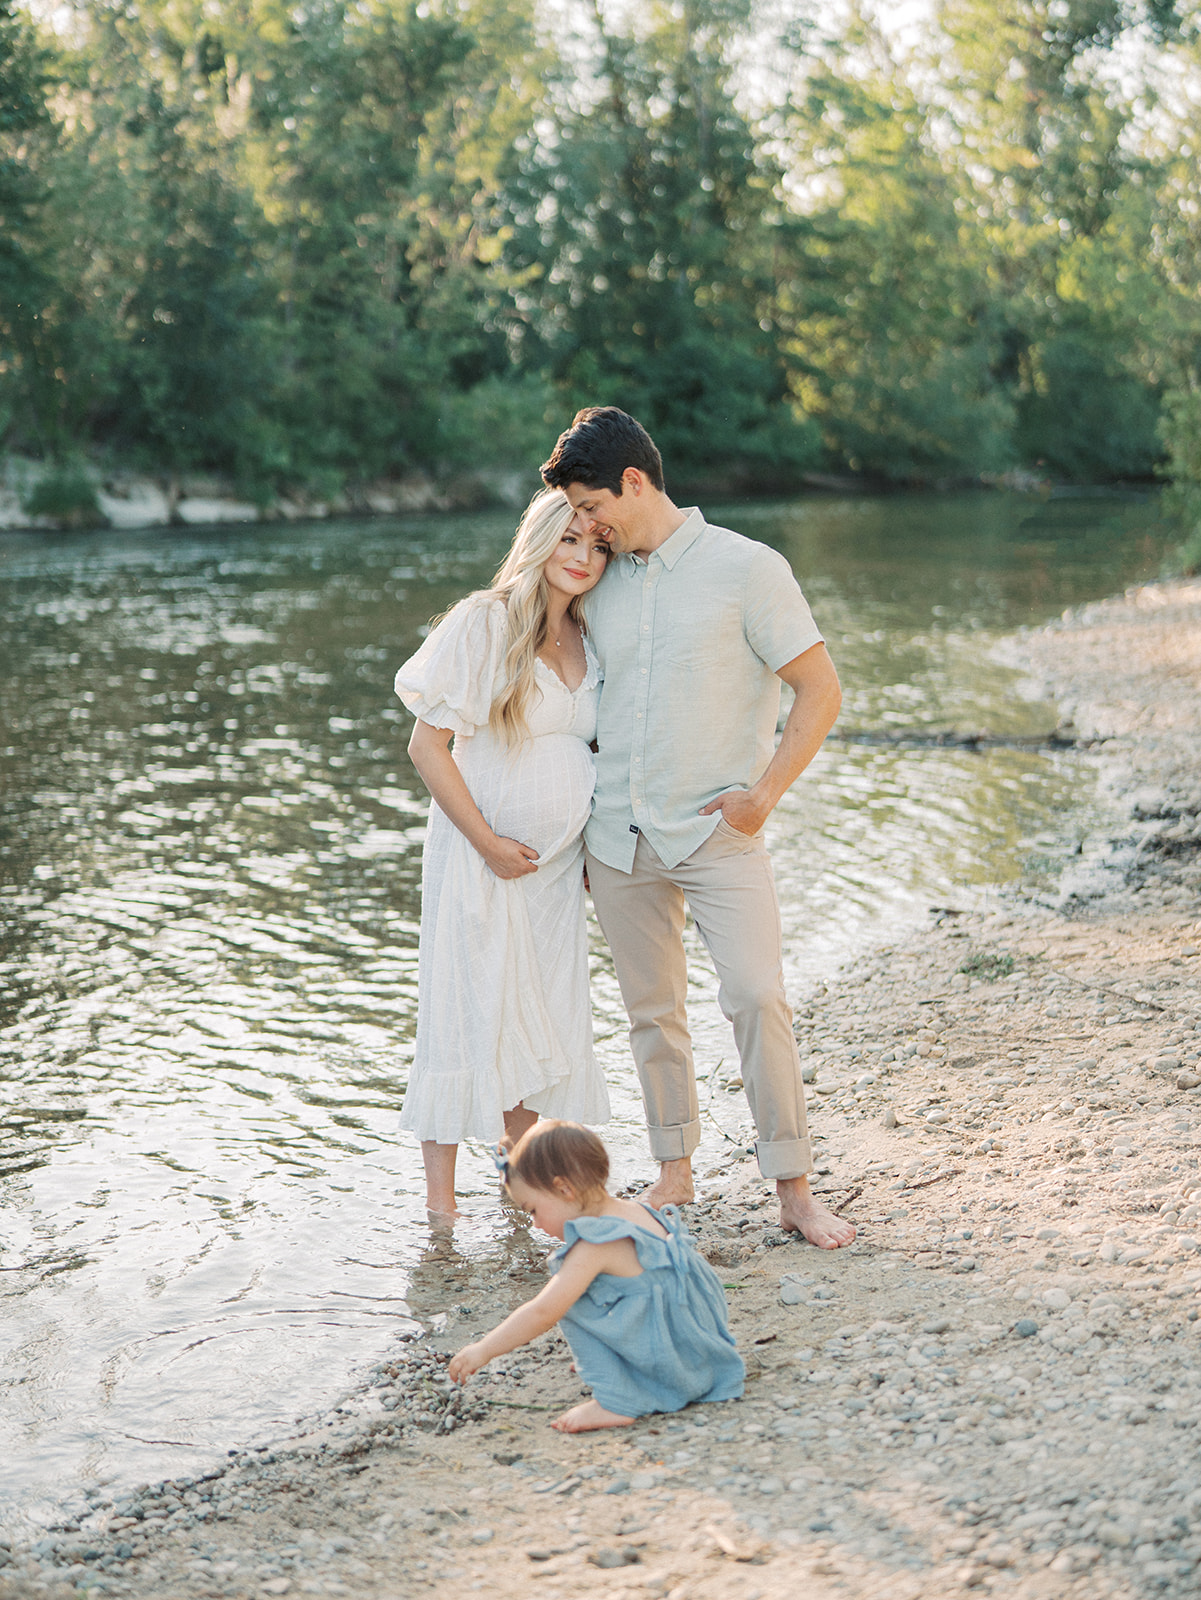 Family maternity session at the boise river in eagle, idaho with hannah mann photography